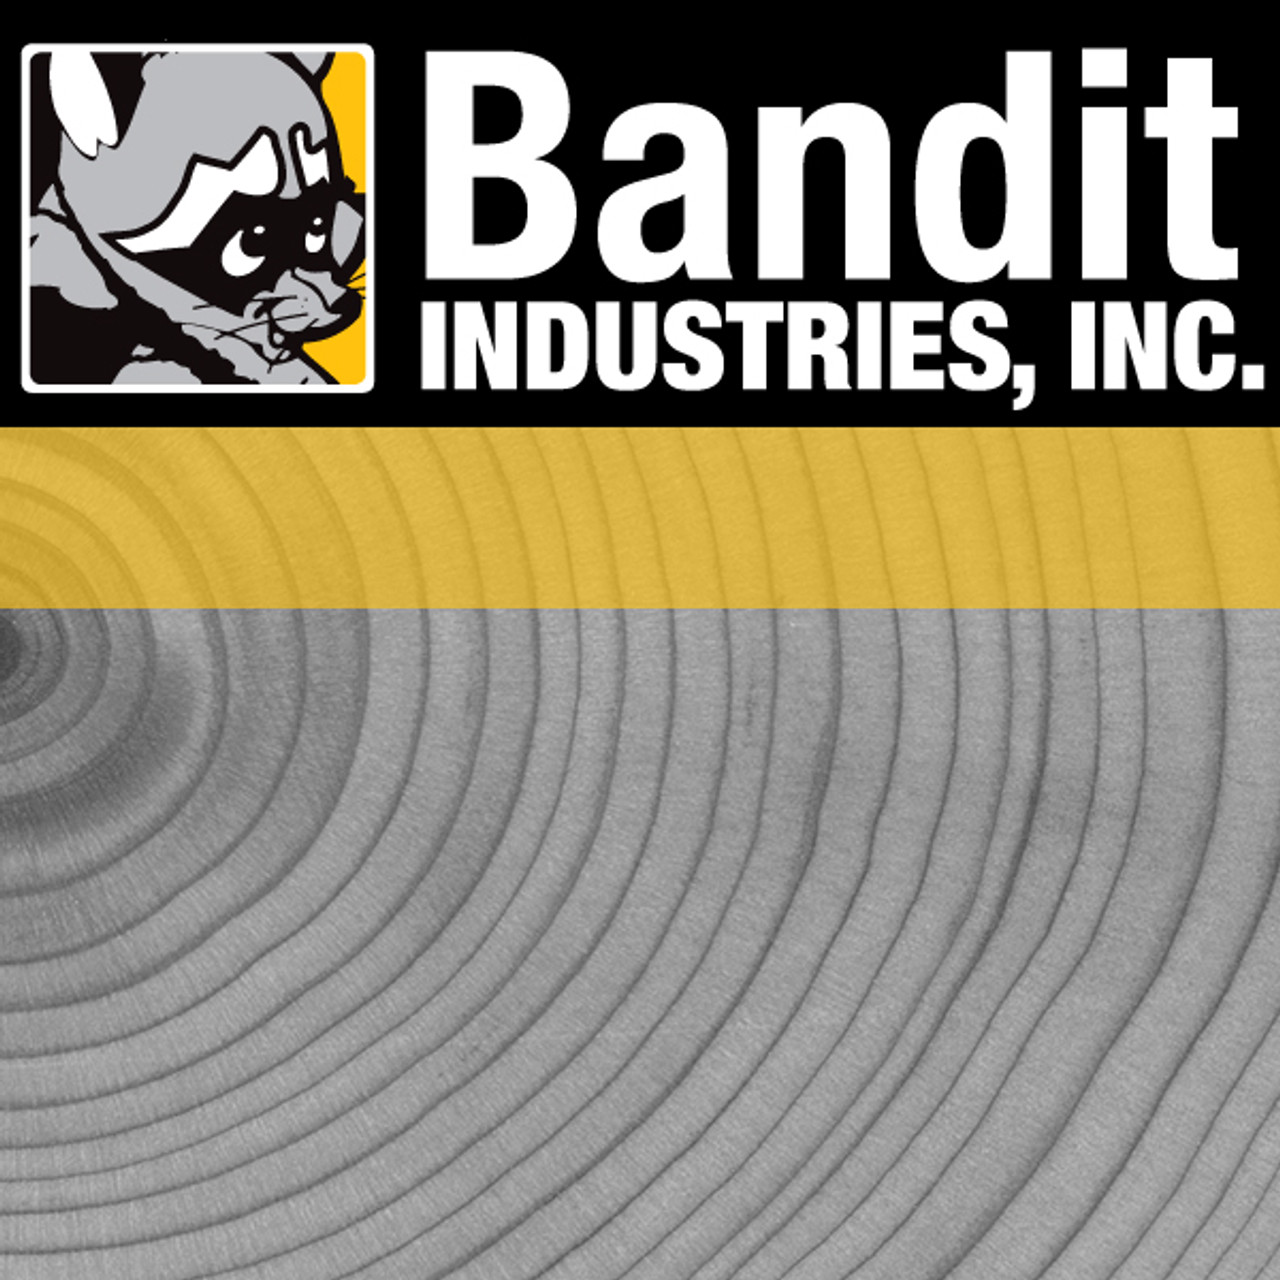 990-1014-56: BANDIT 54"" INFEED AND FOLDING PAN IN LIEU OF STANDARD